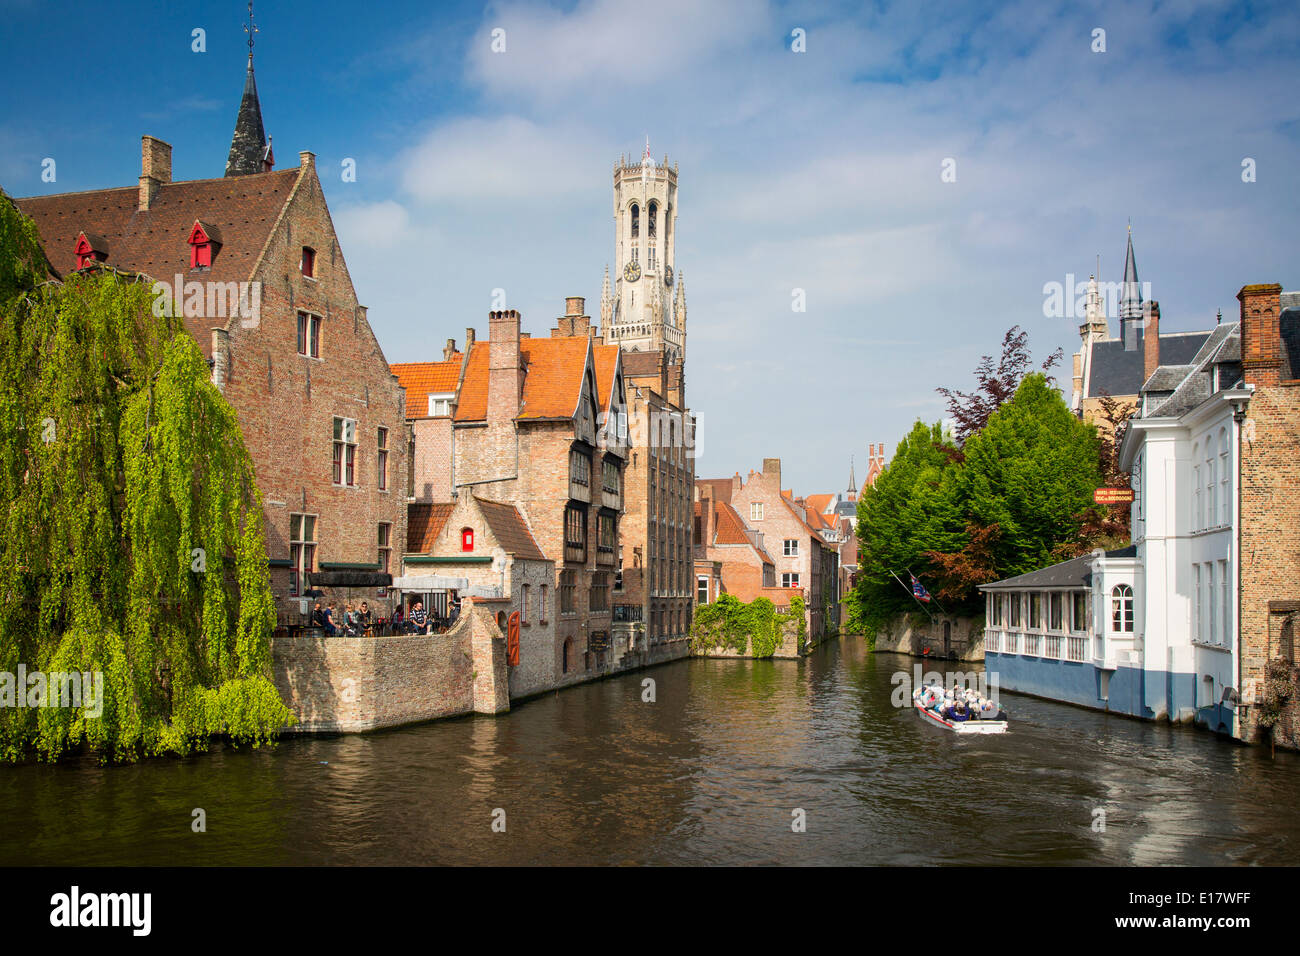 Tourist on boat ride through the canals of Bruges, Belgium Stock Photo